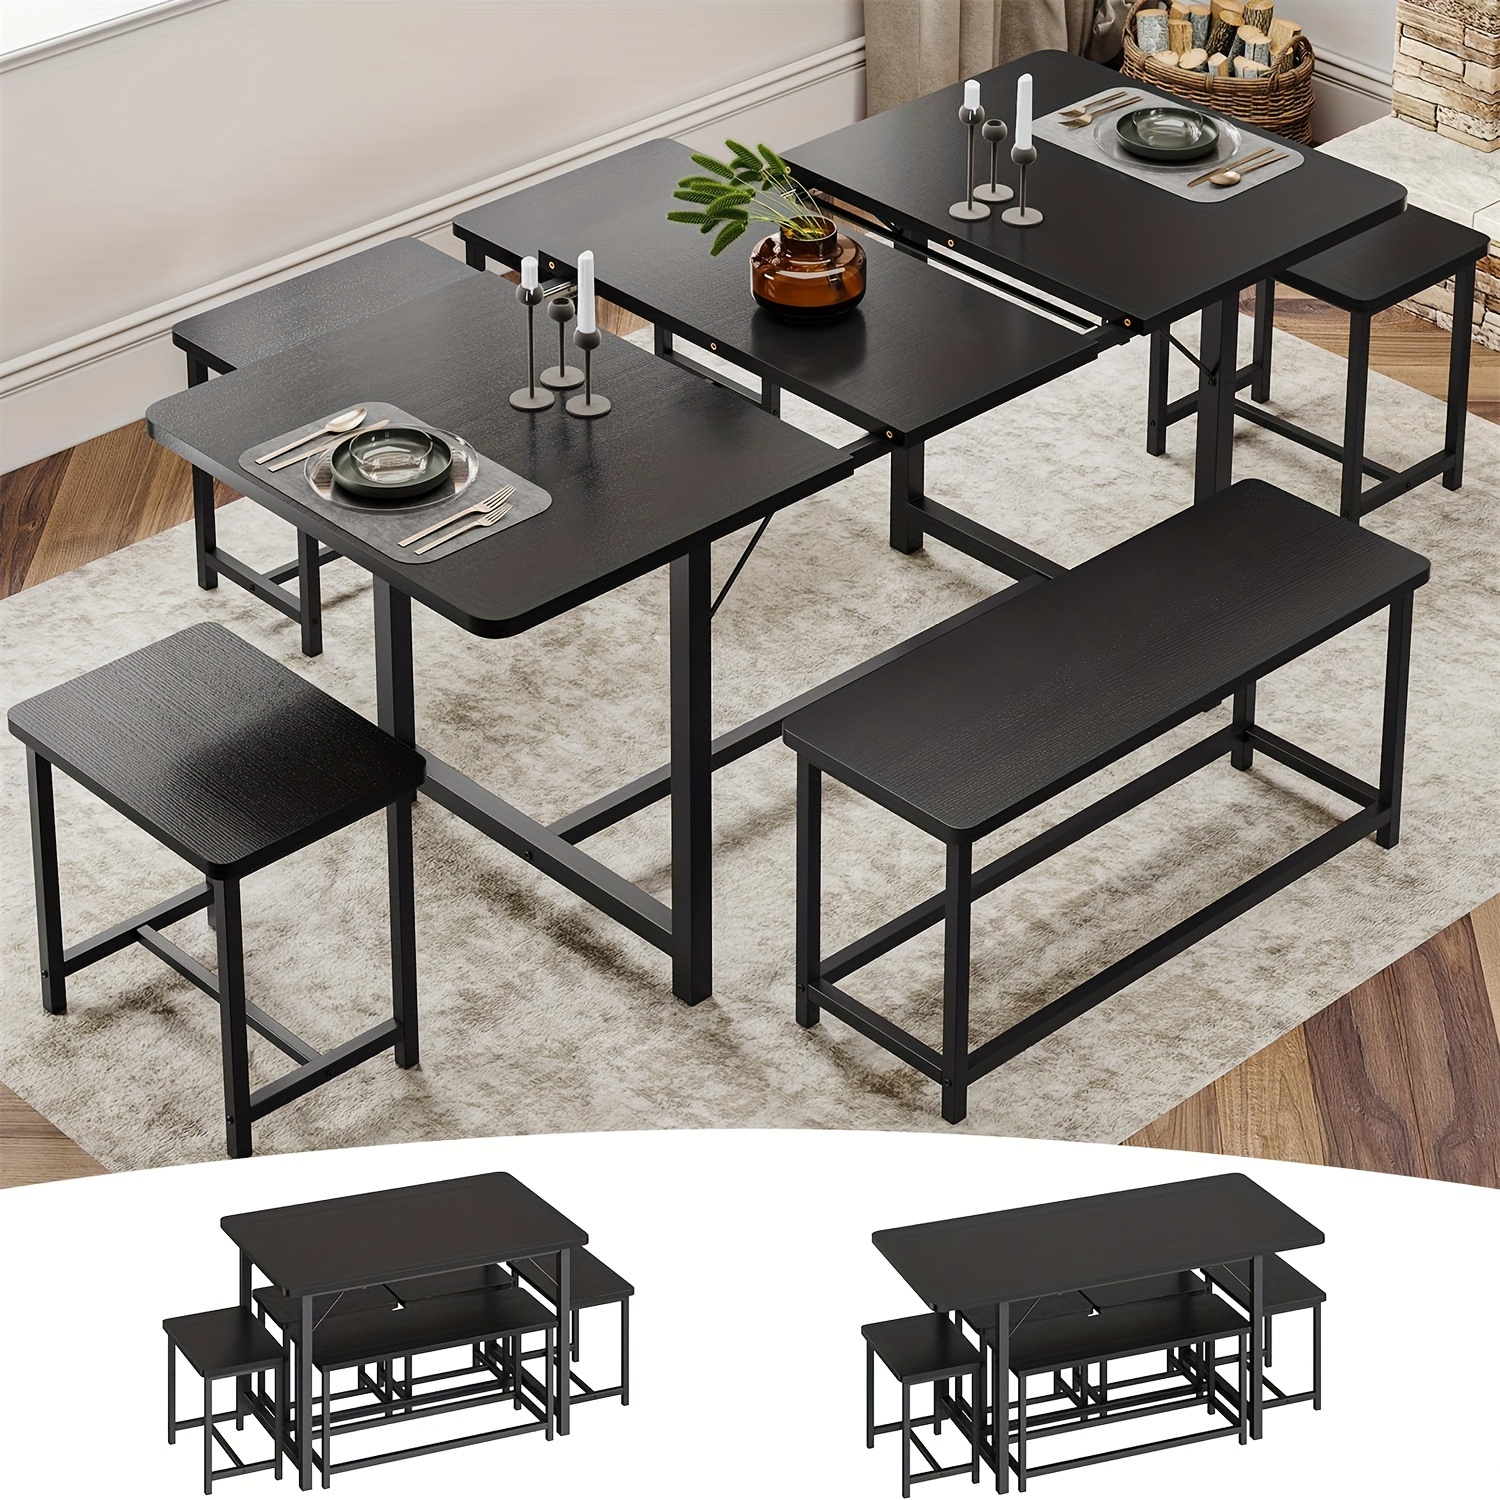 

47.3"-63" Extendable Kitchen Table For 4-6, Rustic Dining Table With Metal Frame And Wooden Board, Space Saving, Black